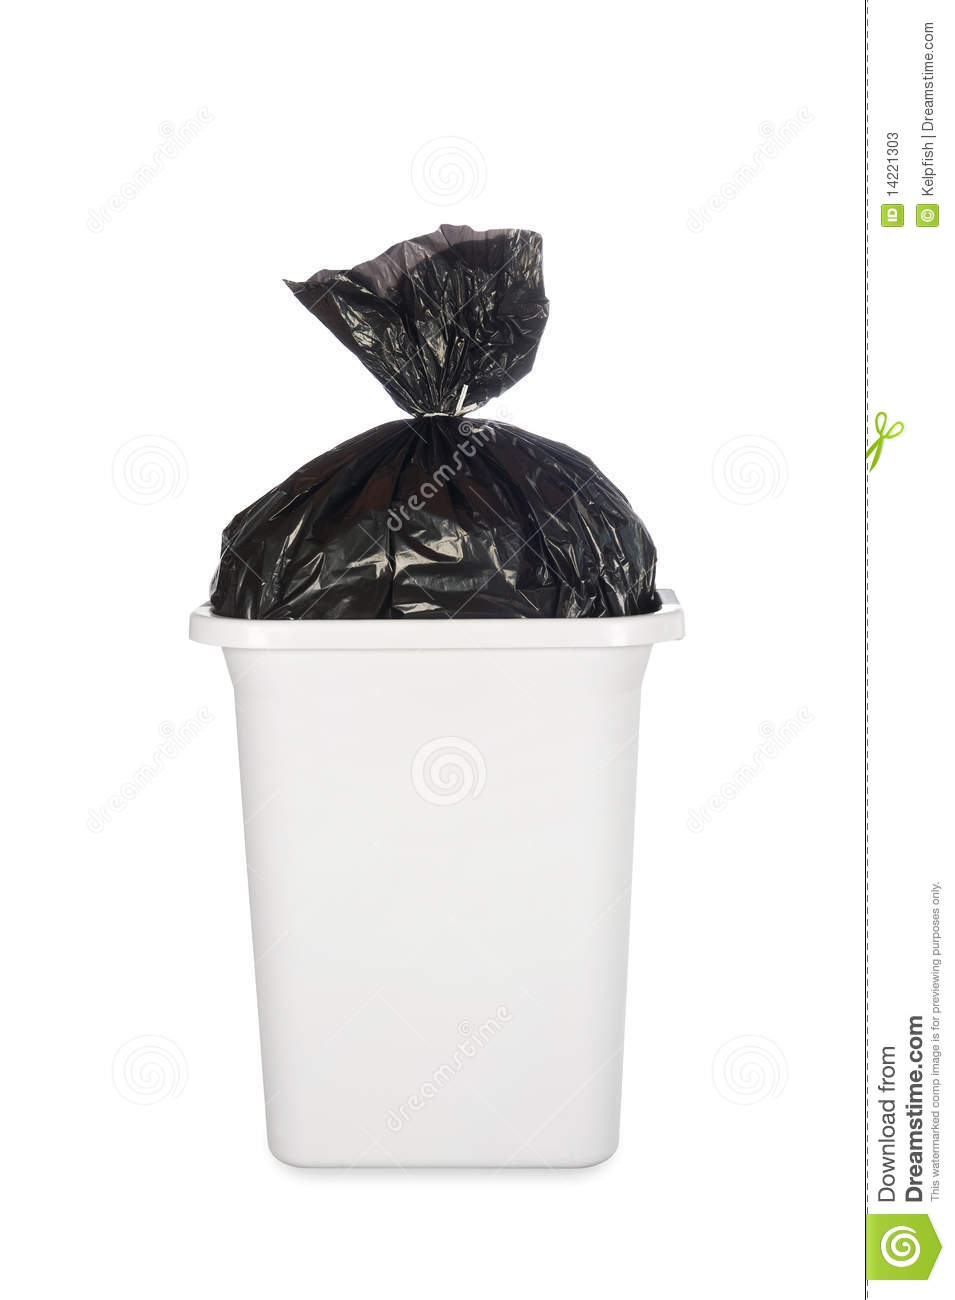 White Trash Can With A Black Trash Bag Full Of Garbage